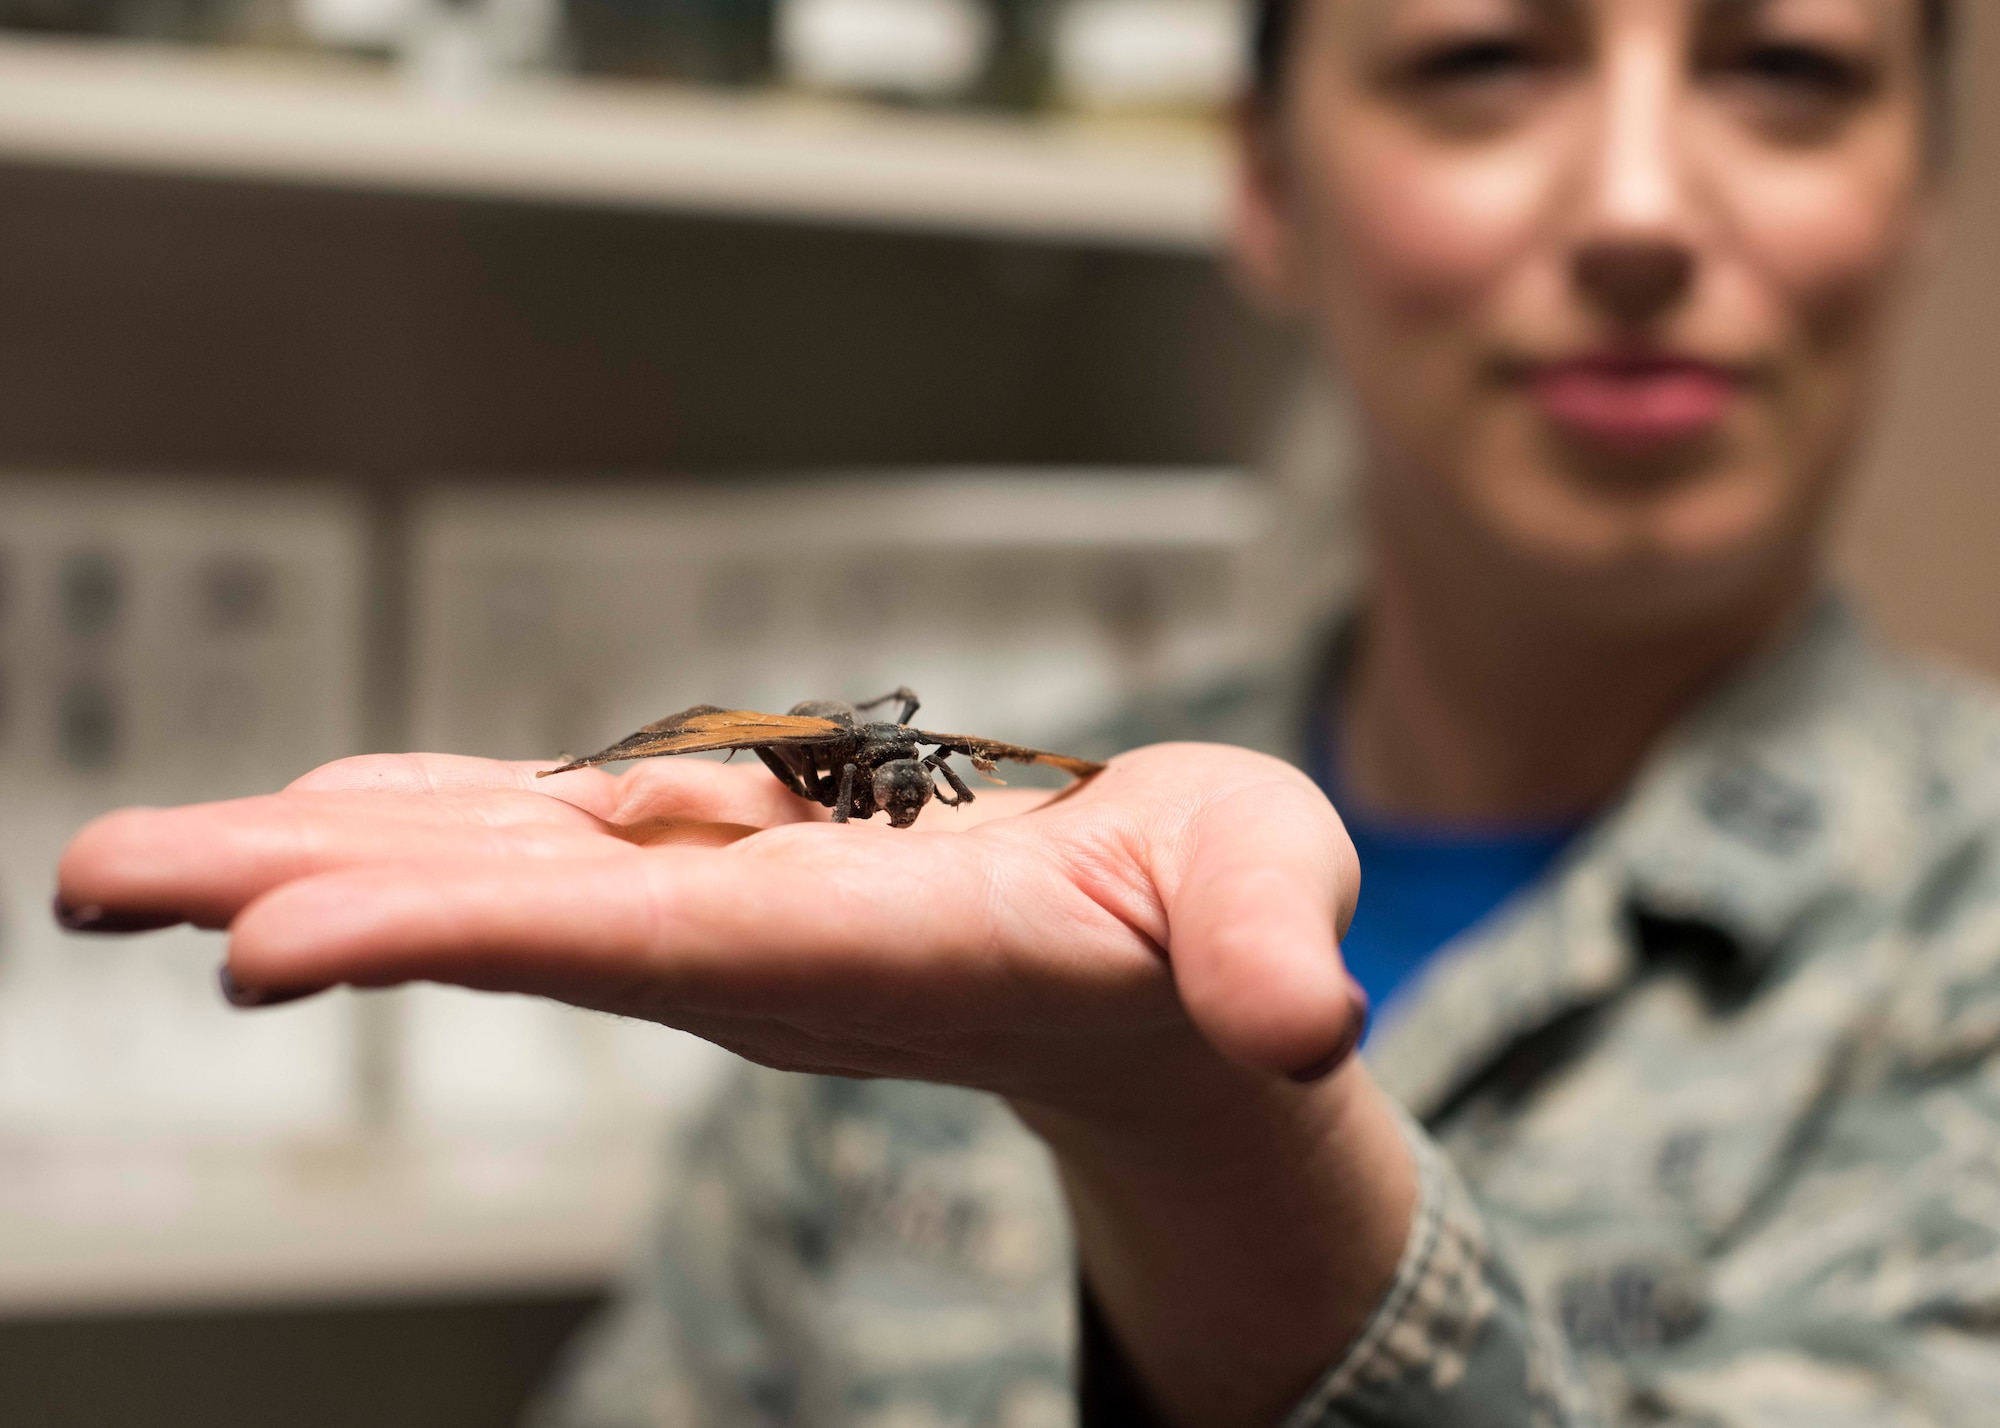 Capt. Sarah Hagan, 49th Medical Group Public Health flight commander, poses with a tarantula hawk, which is an insect species native to New Mexico, Jan. 11, 2019, on Holloman Air Force Base, N.M. The Public Health flight oversees 18 programs across the 49th Wing. One of their missions is pest control and testing for insect-borne illness. (U.S. Air Force photo by Staff Sgt. BreeAnn Sachs)